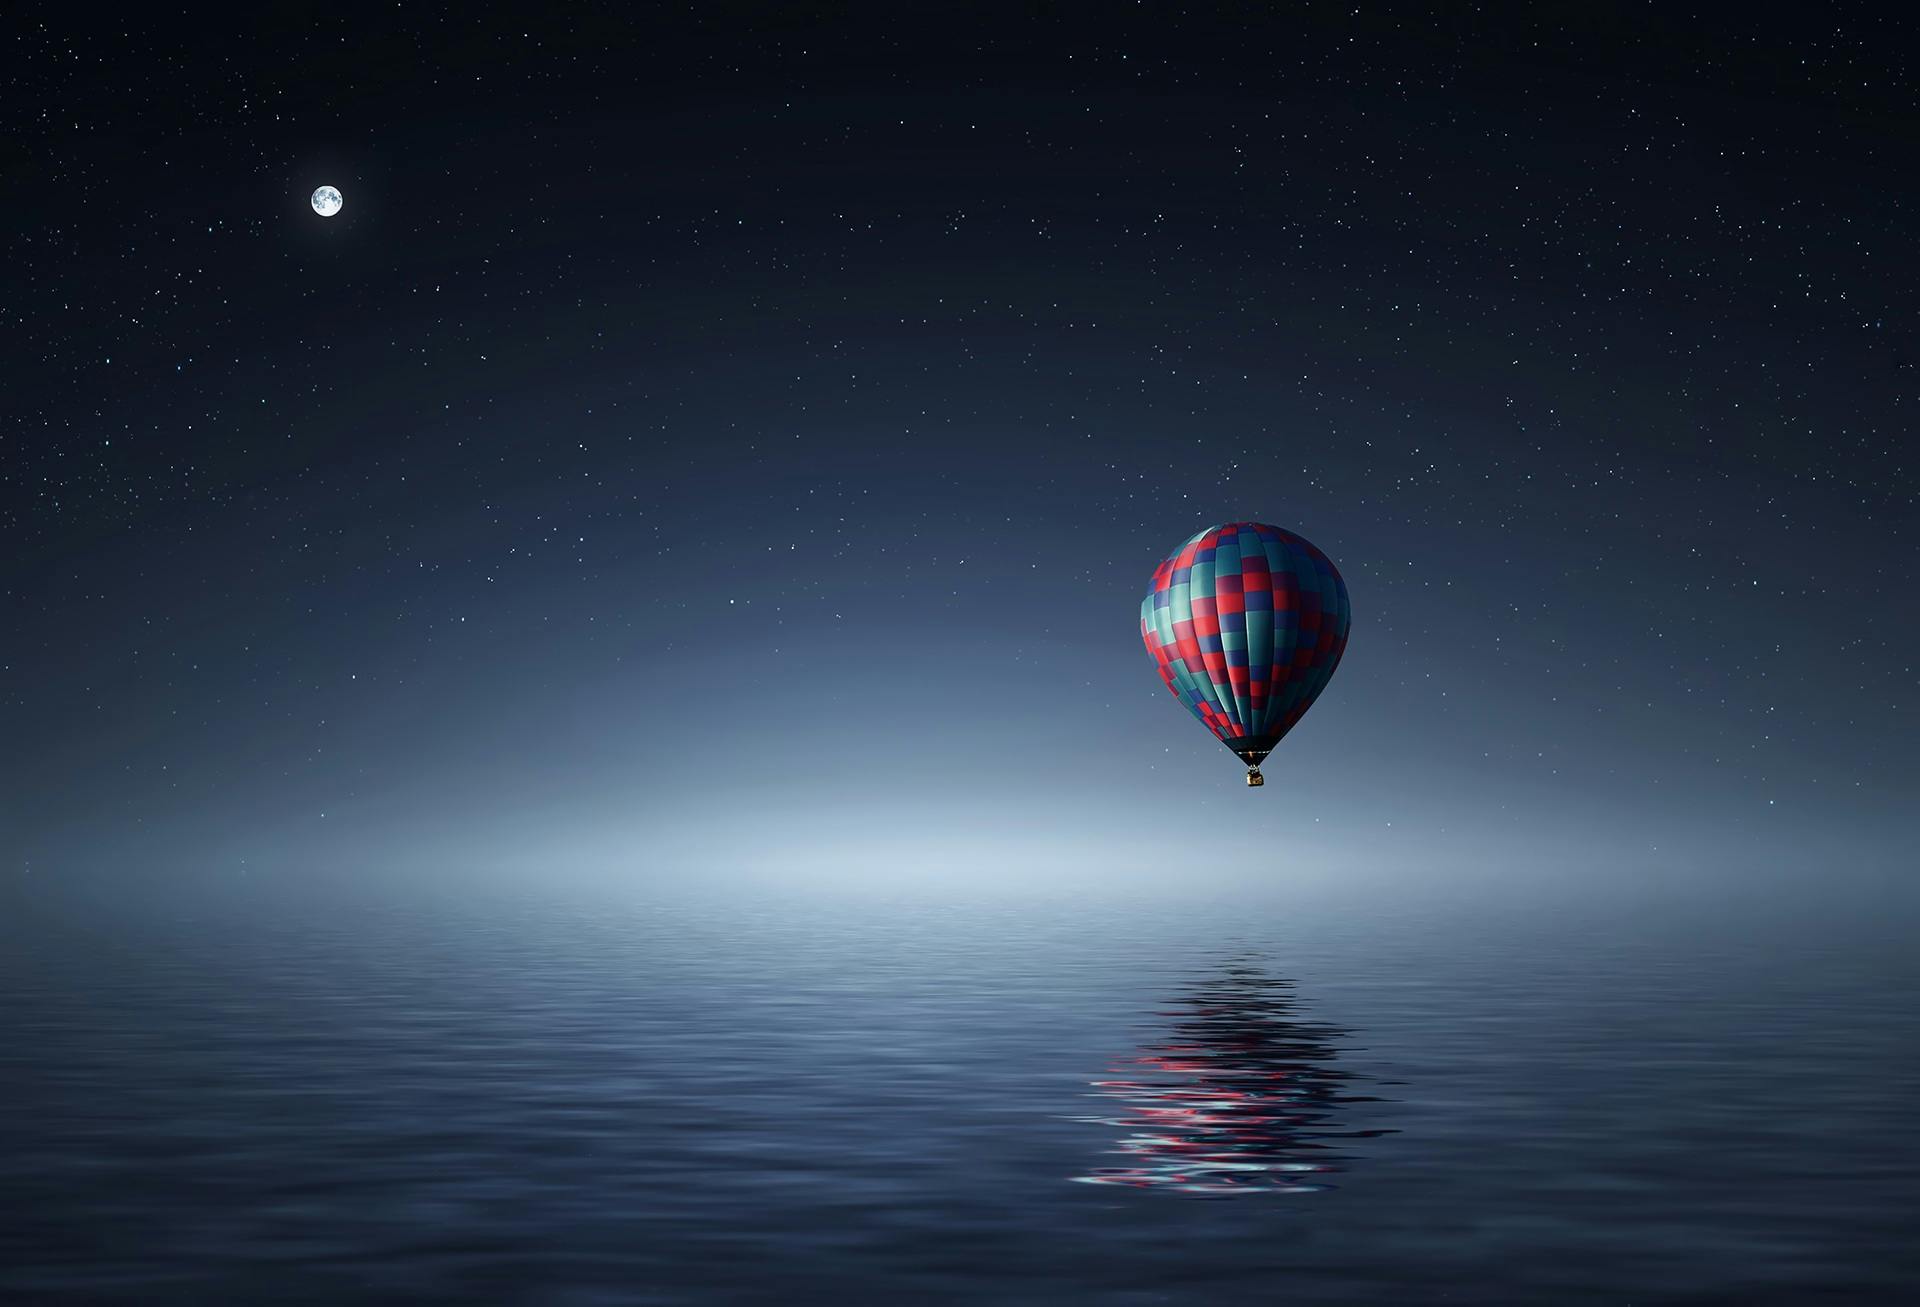 Wallpaper Red and Blue Hot Air Balloon Floating on Air on Body of Water during Night Time